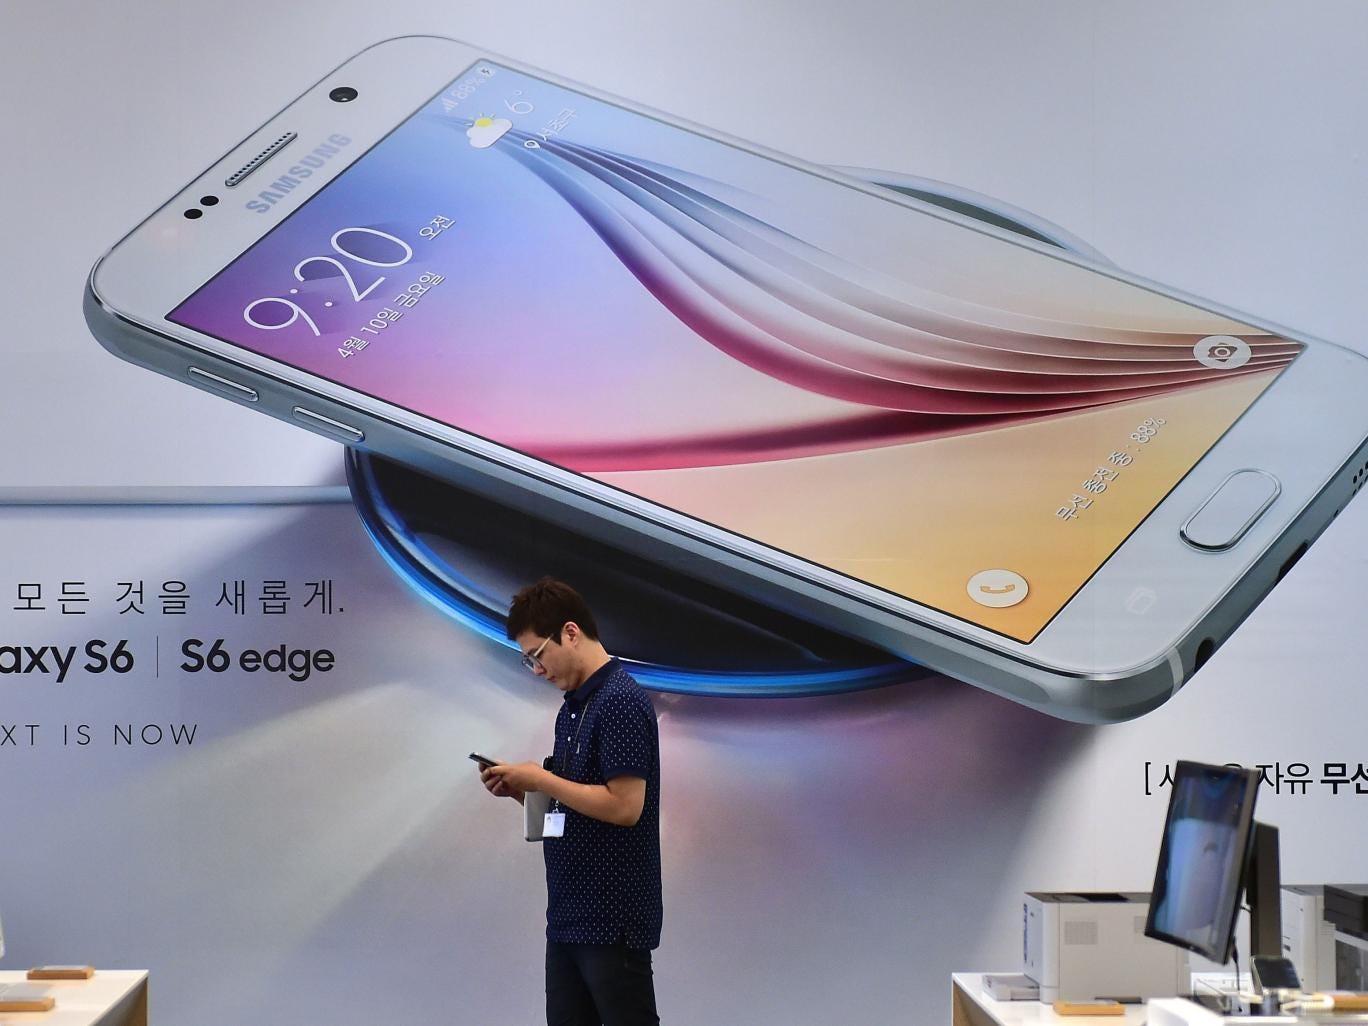 Samsung Galaxy S7: New phone to have press